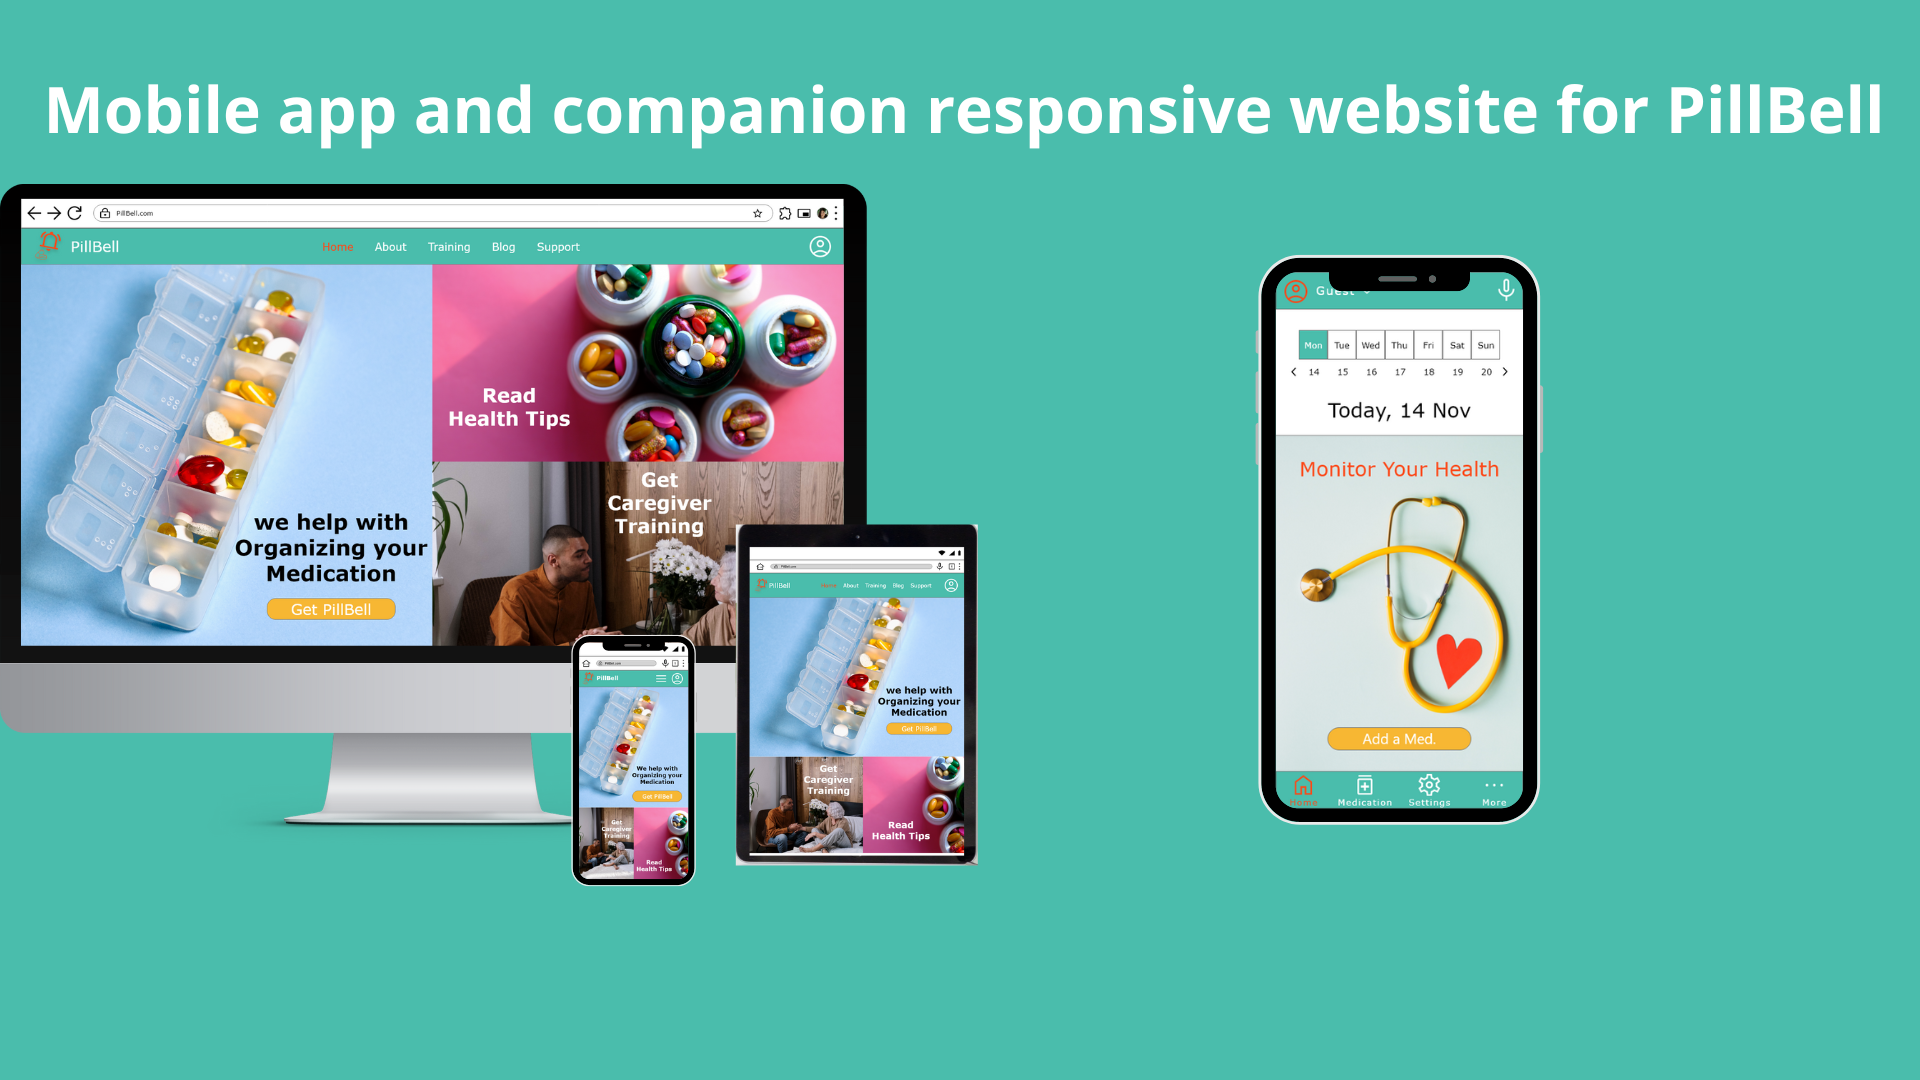 Mobile app and companion responsive website for PillBell